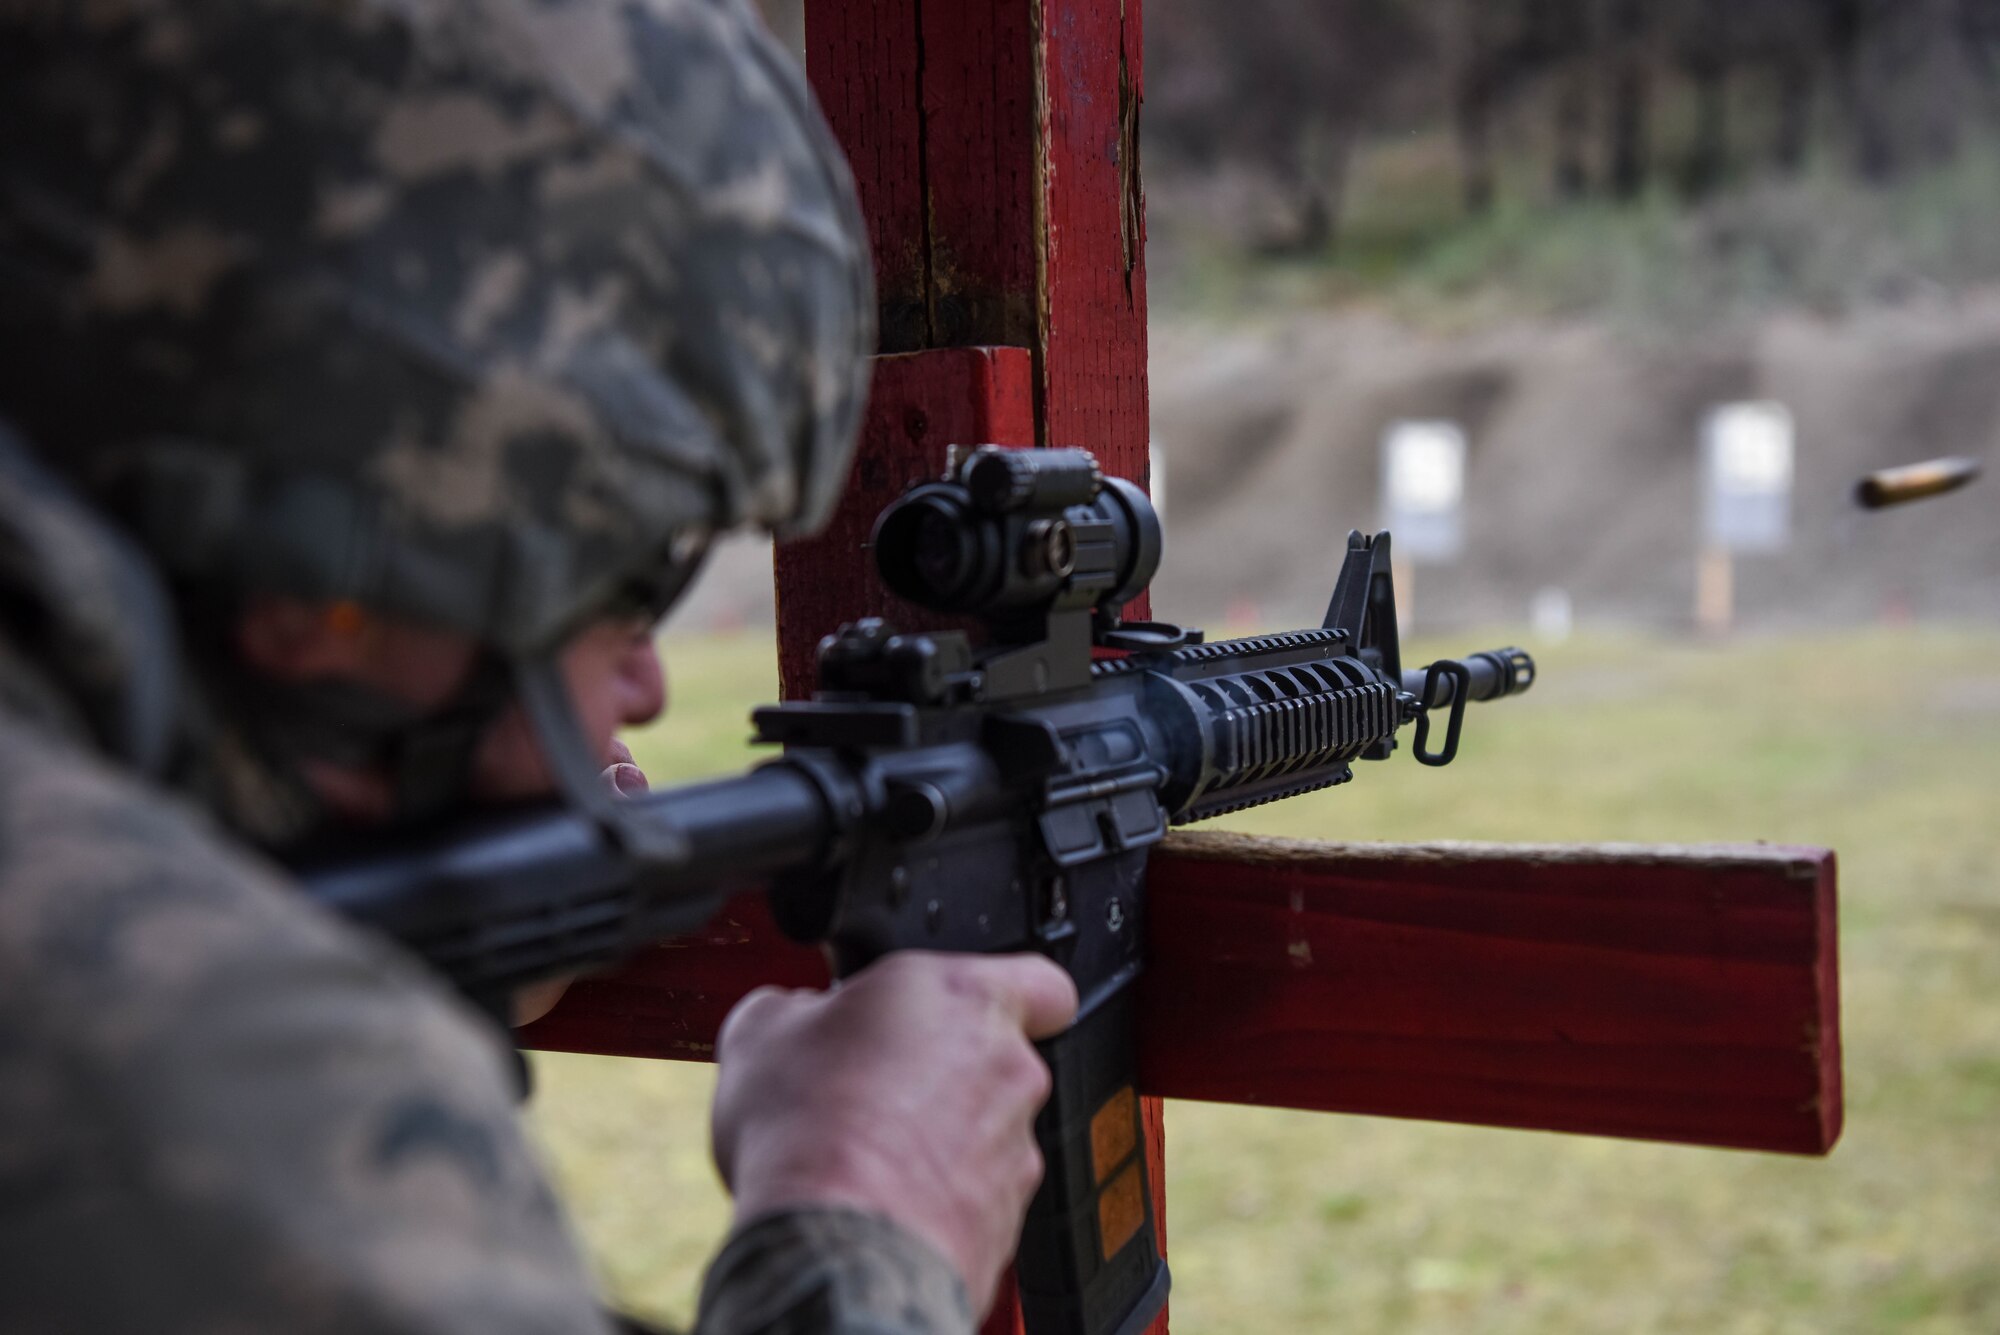 Tech. Sgt. Christopher Groessler, 62nd Maintenance Squadron munitions technician, fires an M-4 carbine during the 627th Security Forces Squadron’s Combat Arms Training and Maintenance class at Joint Base Lewis-McChord, Wash., Jan. 31, 2018.